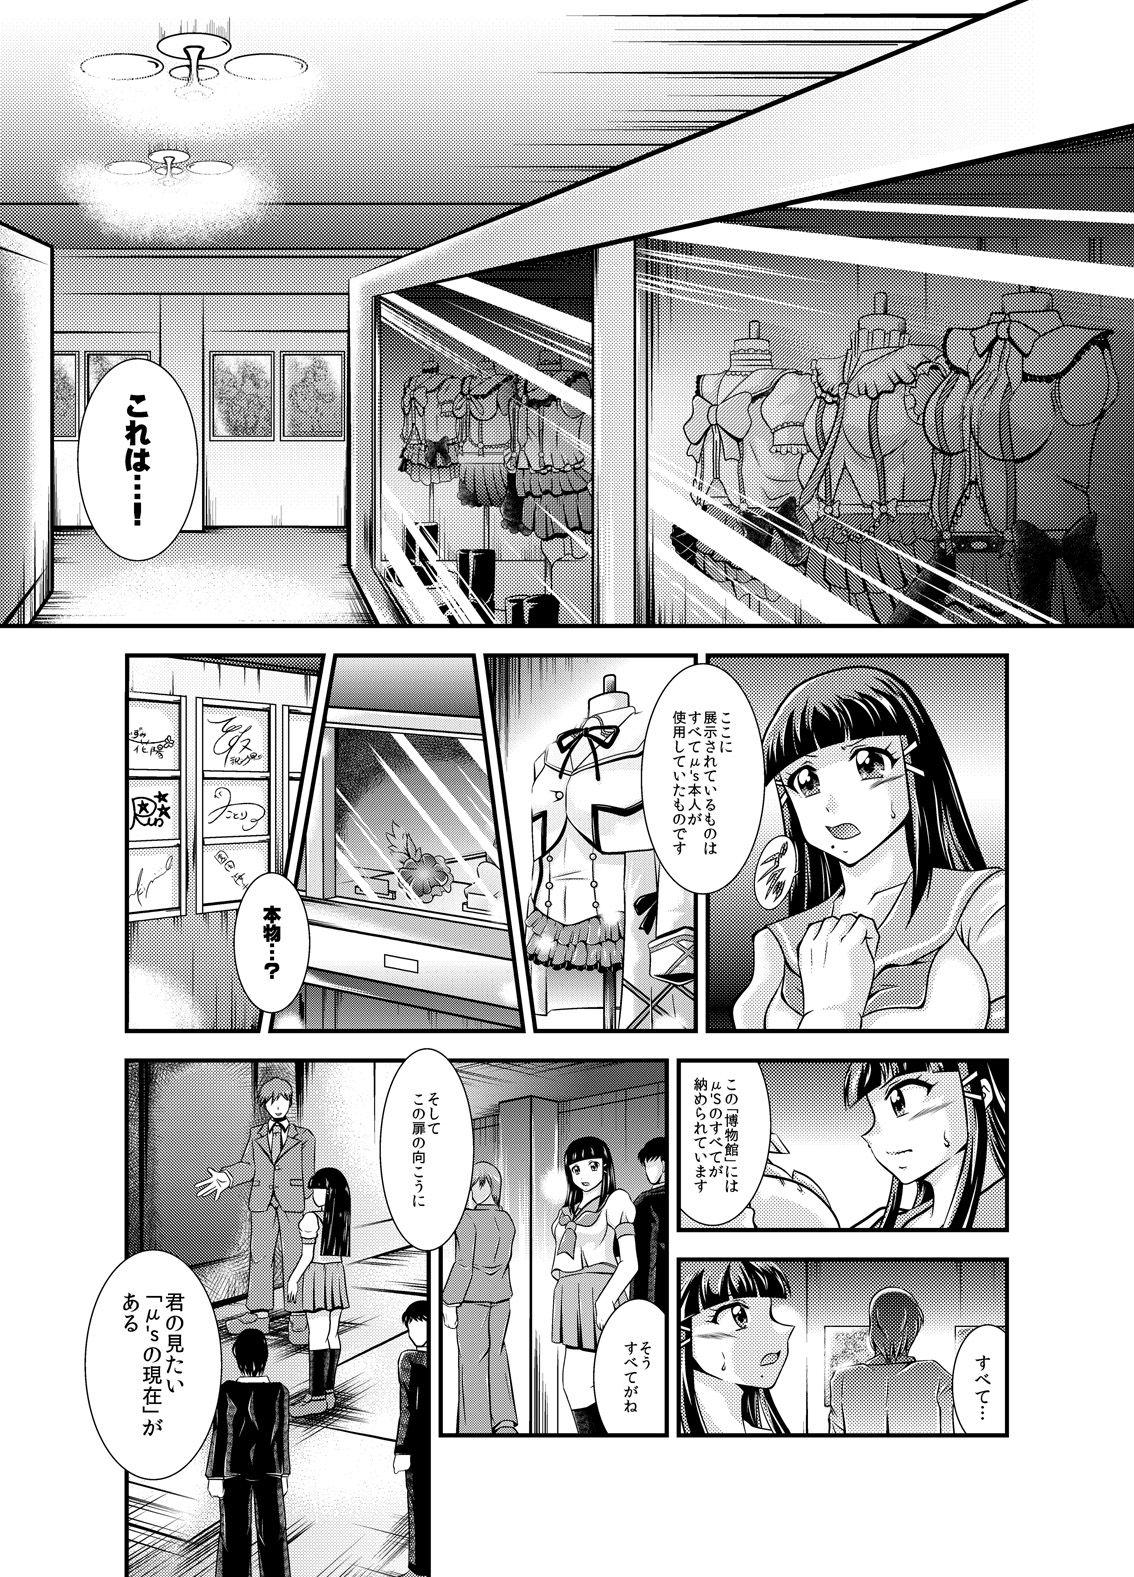 Nylon ProjectAqours EP02:"M"EMORIES - Love live Married - Page 5